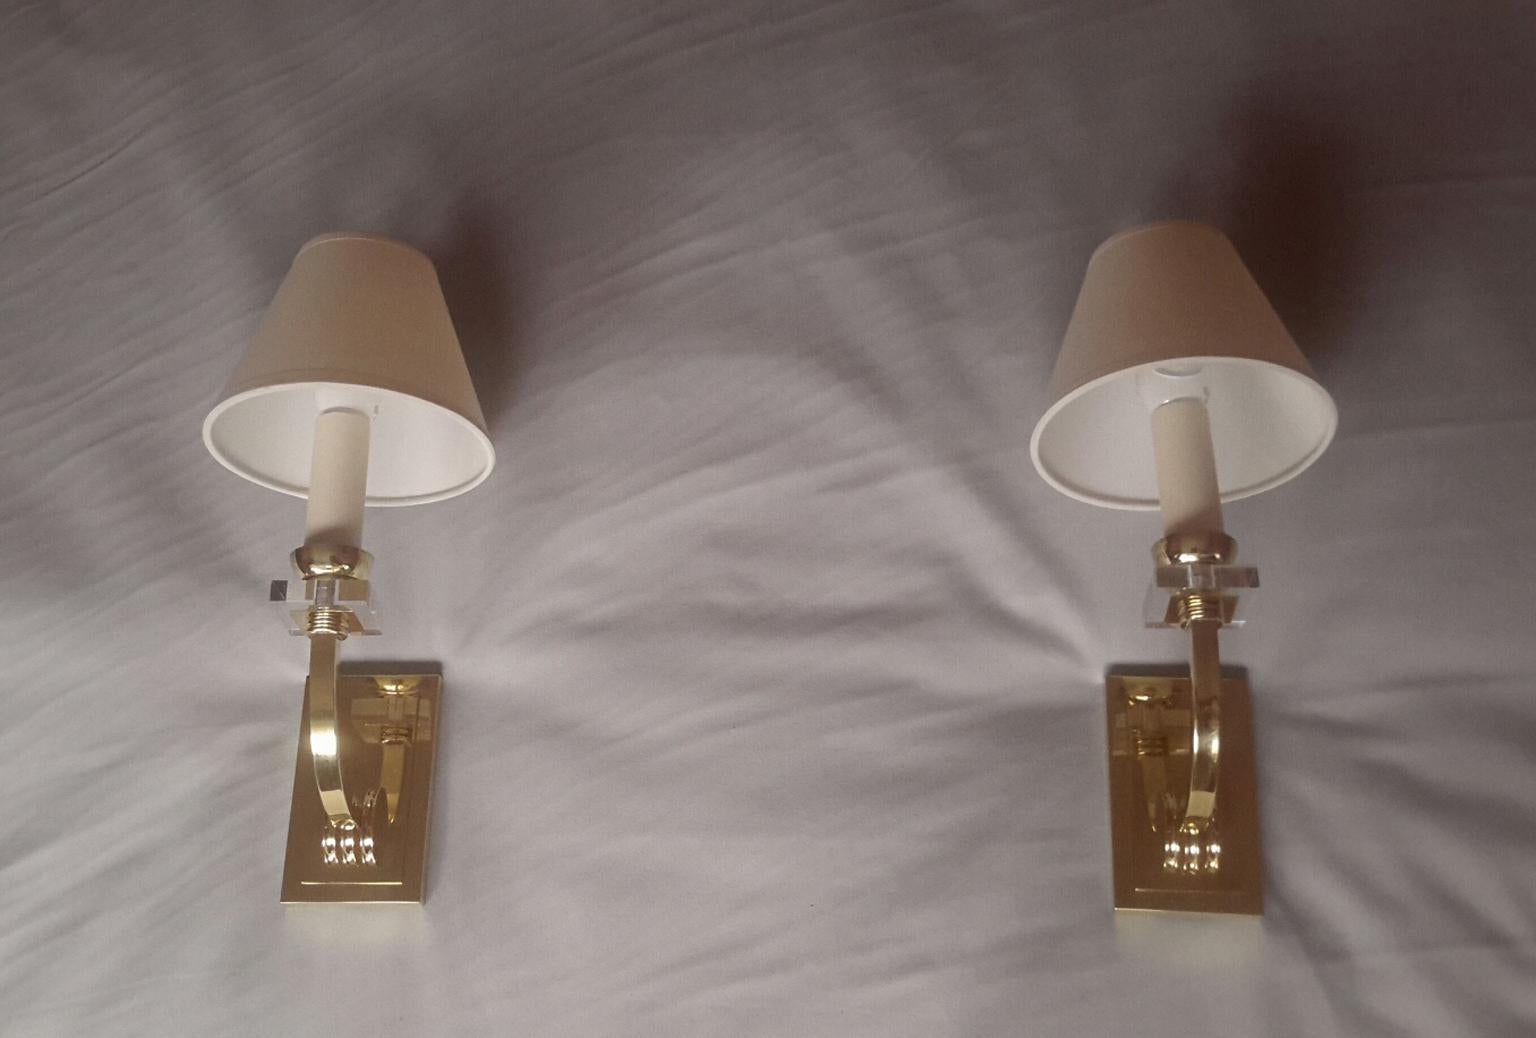 Lucite Jacques Adnet Neoclassical Pair of Gilt Bronze Wall Sconces, France, 1950s For Sale